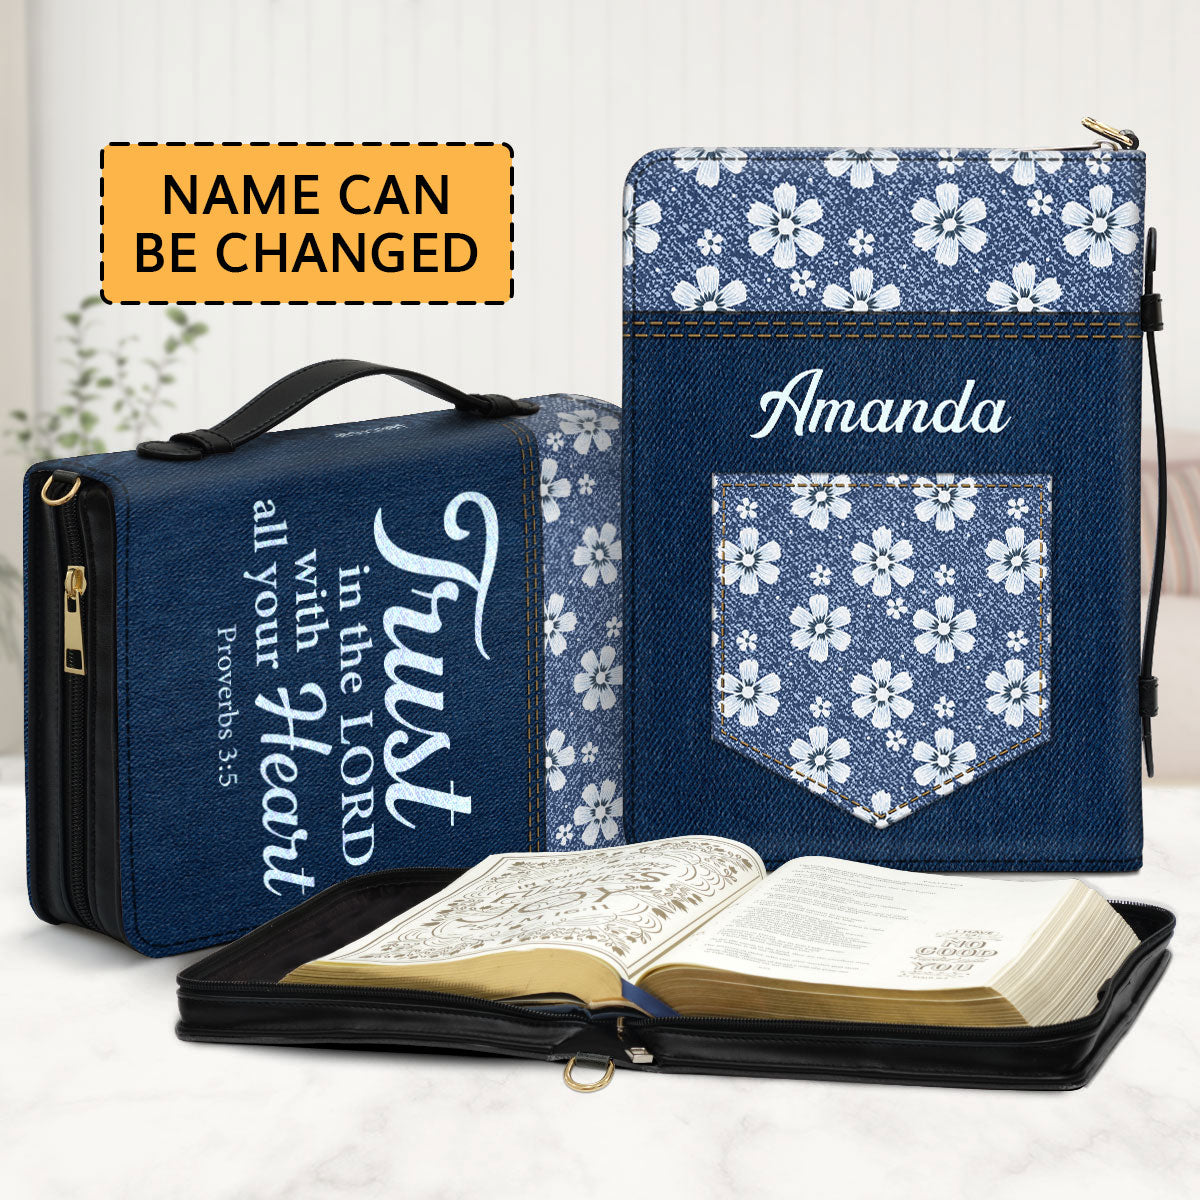 Jesuspirit | Proverbs 3:5 | Awesome Personalized Bible Cover | Trust In The Lord With All Your Heart HN21